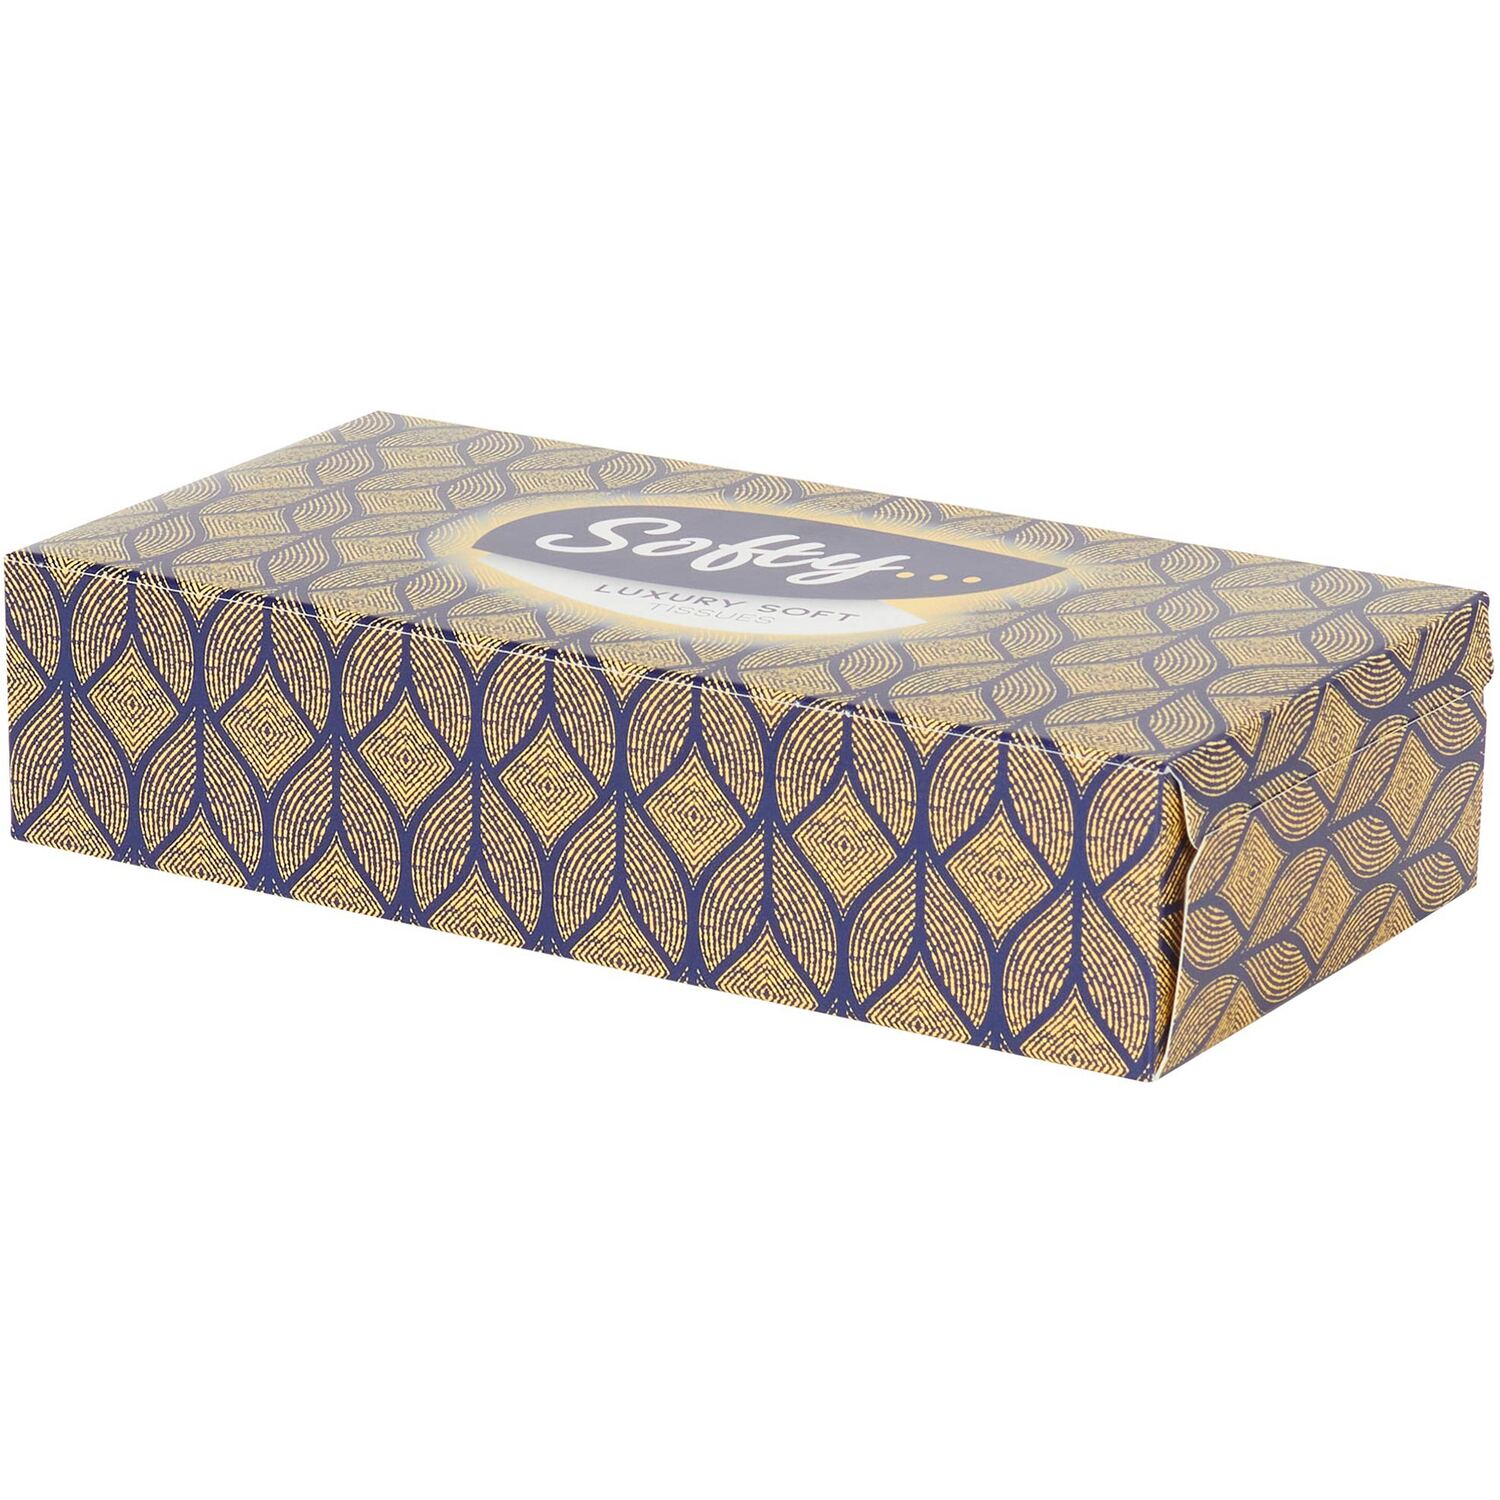 Softy Luxury Soft Tissues 72 Sheets 3 Ply Image 4